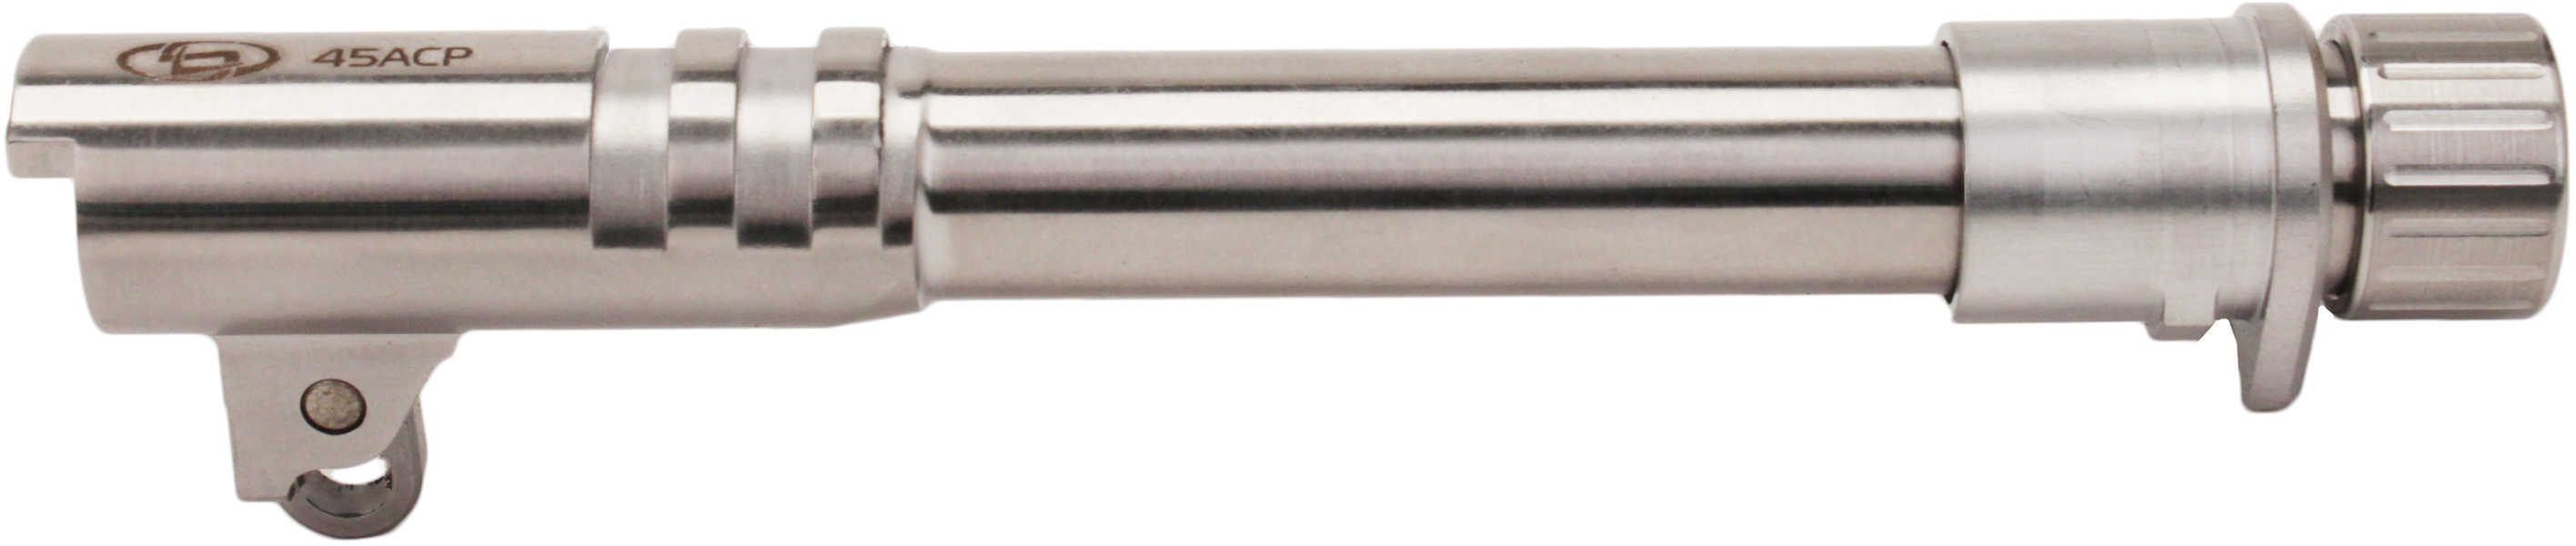 Storm Lake Barrels 45 ACP 5.75" Fits 1911 Stainless Finish .578-28 Thread With Link/Pin/Bushing 340